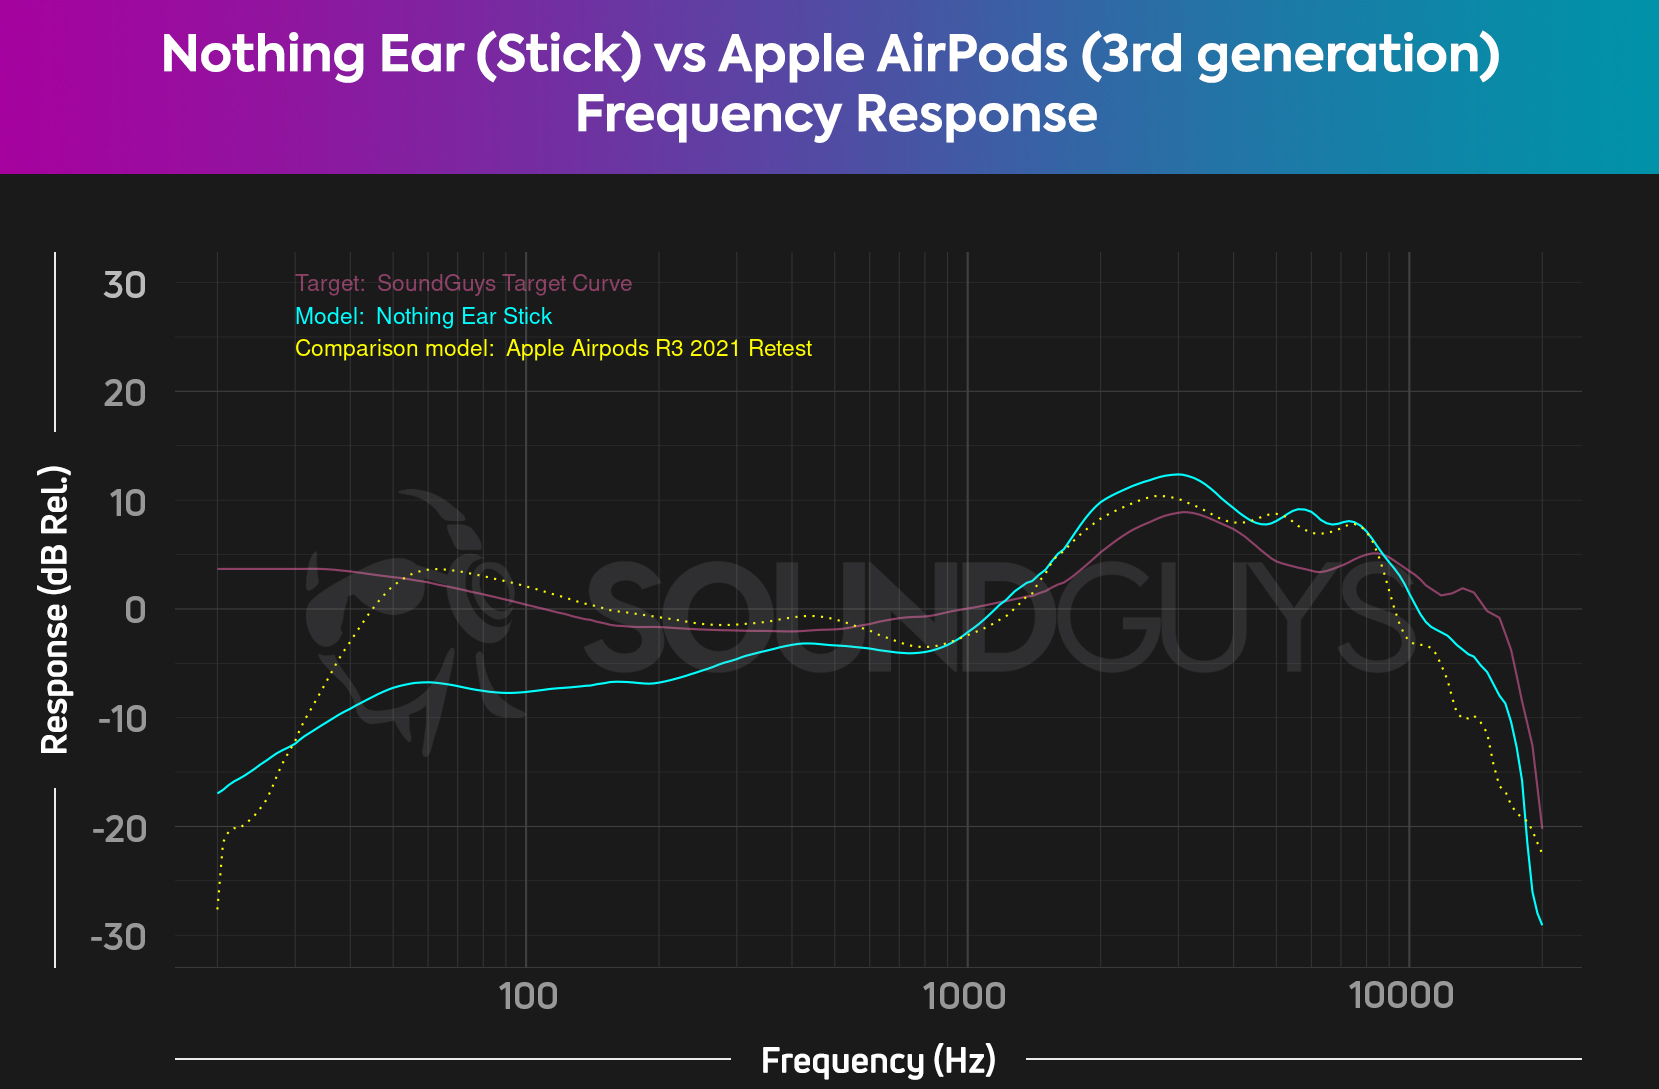 A chart showing the sound differences between the Nothing Ear (Stick) and the Apple AirPods (3rd generation) overlaid on the SoundGuys House Curve.